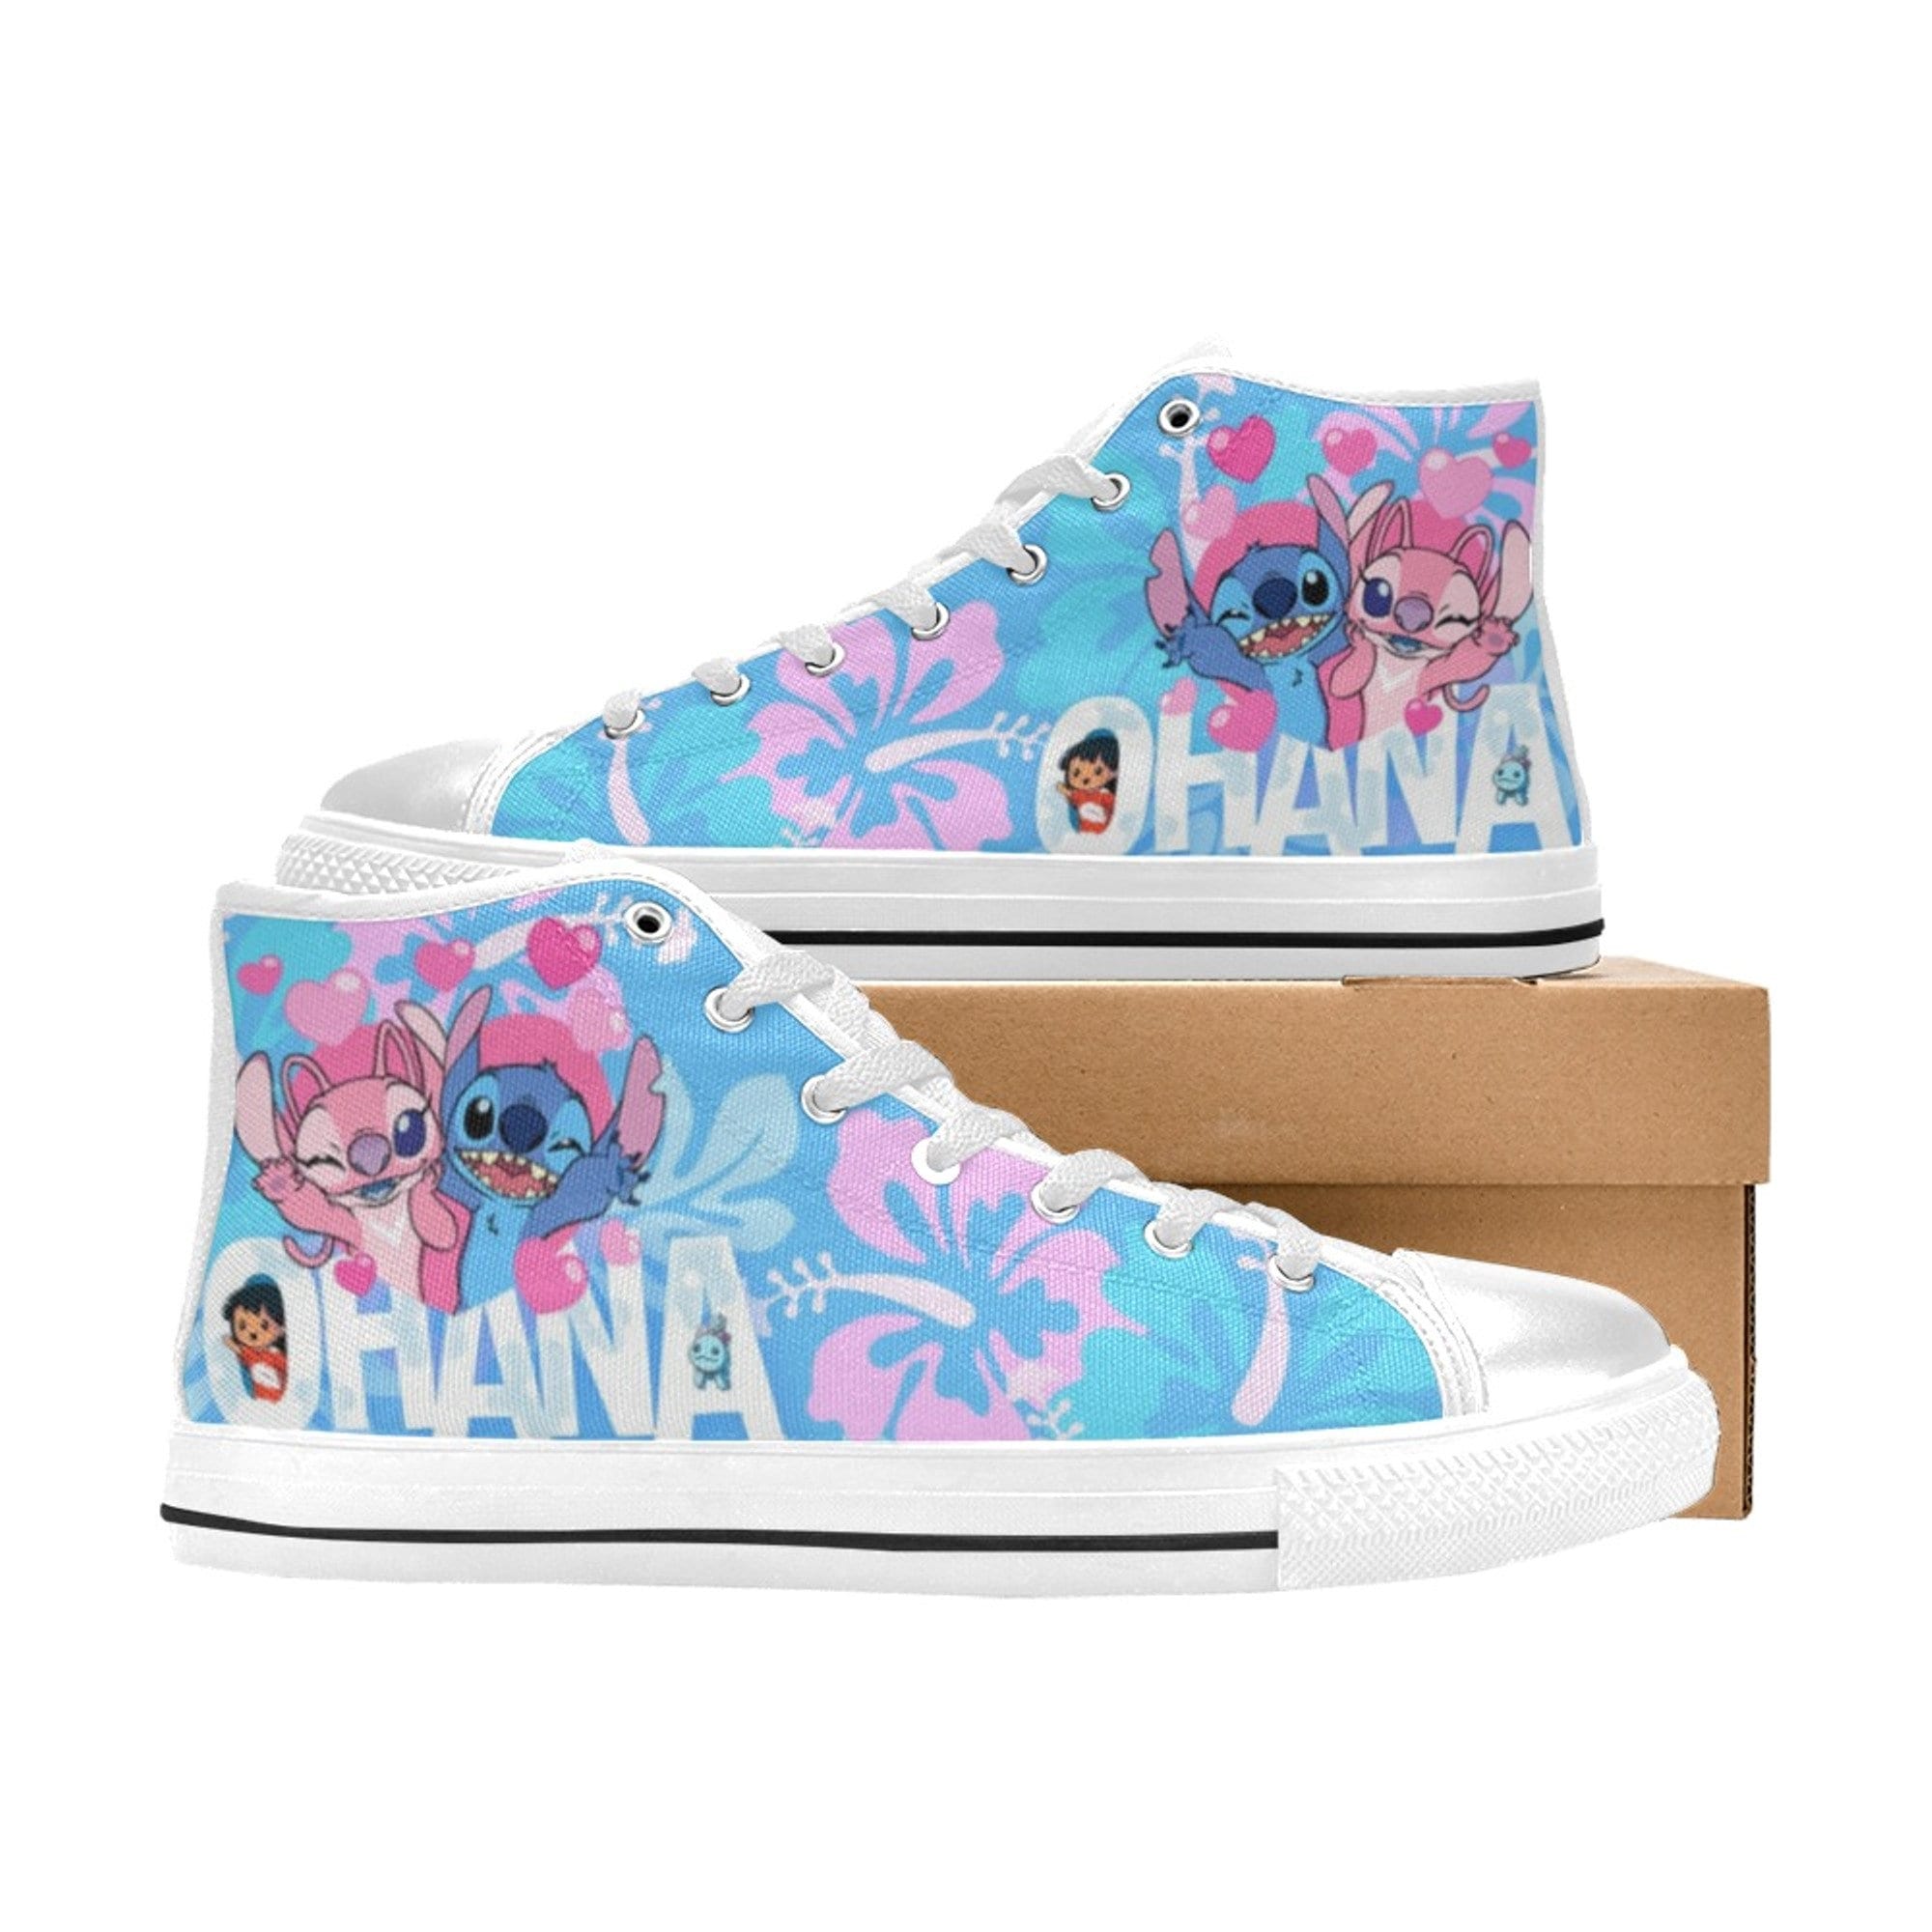 Stitch shoes, stitch merch, Lilo and stitch sneakers sold by ChaZhan, SKU  38717526